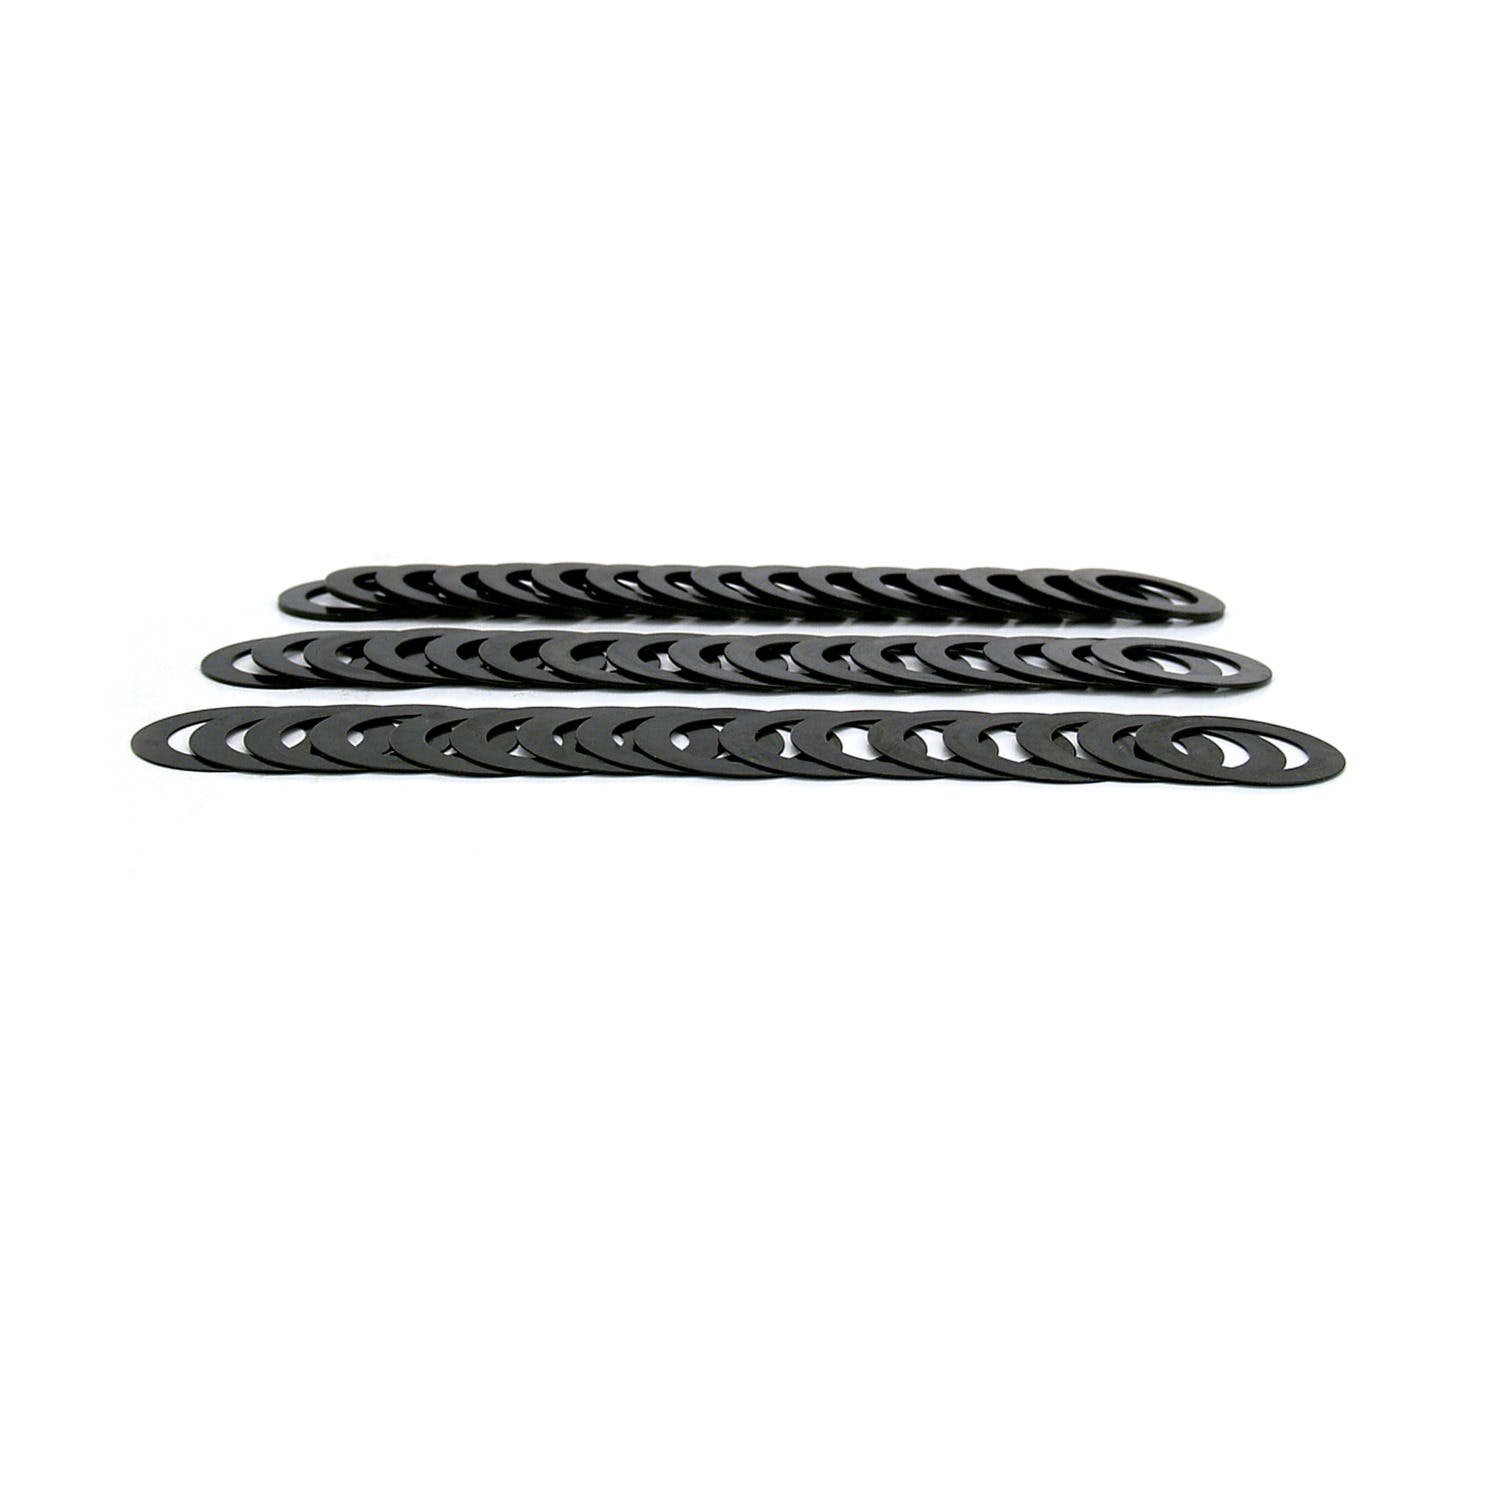 Competition Cams 4755 Valve Spring Shim Kits